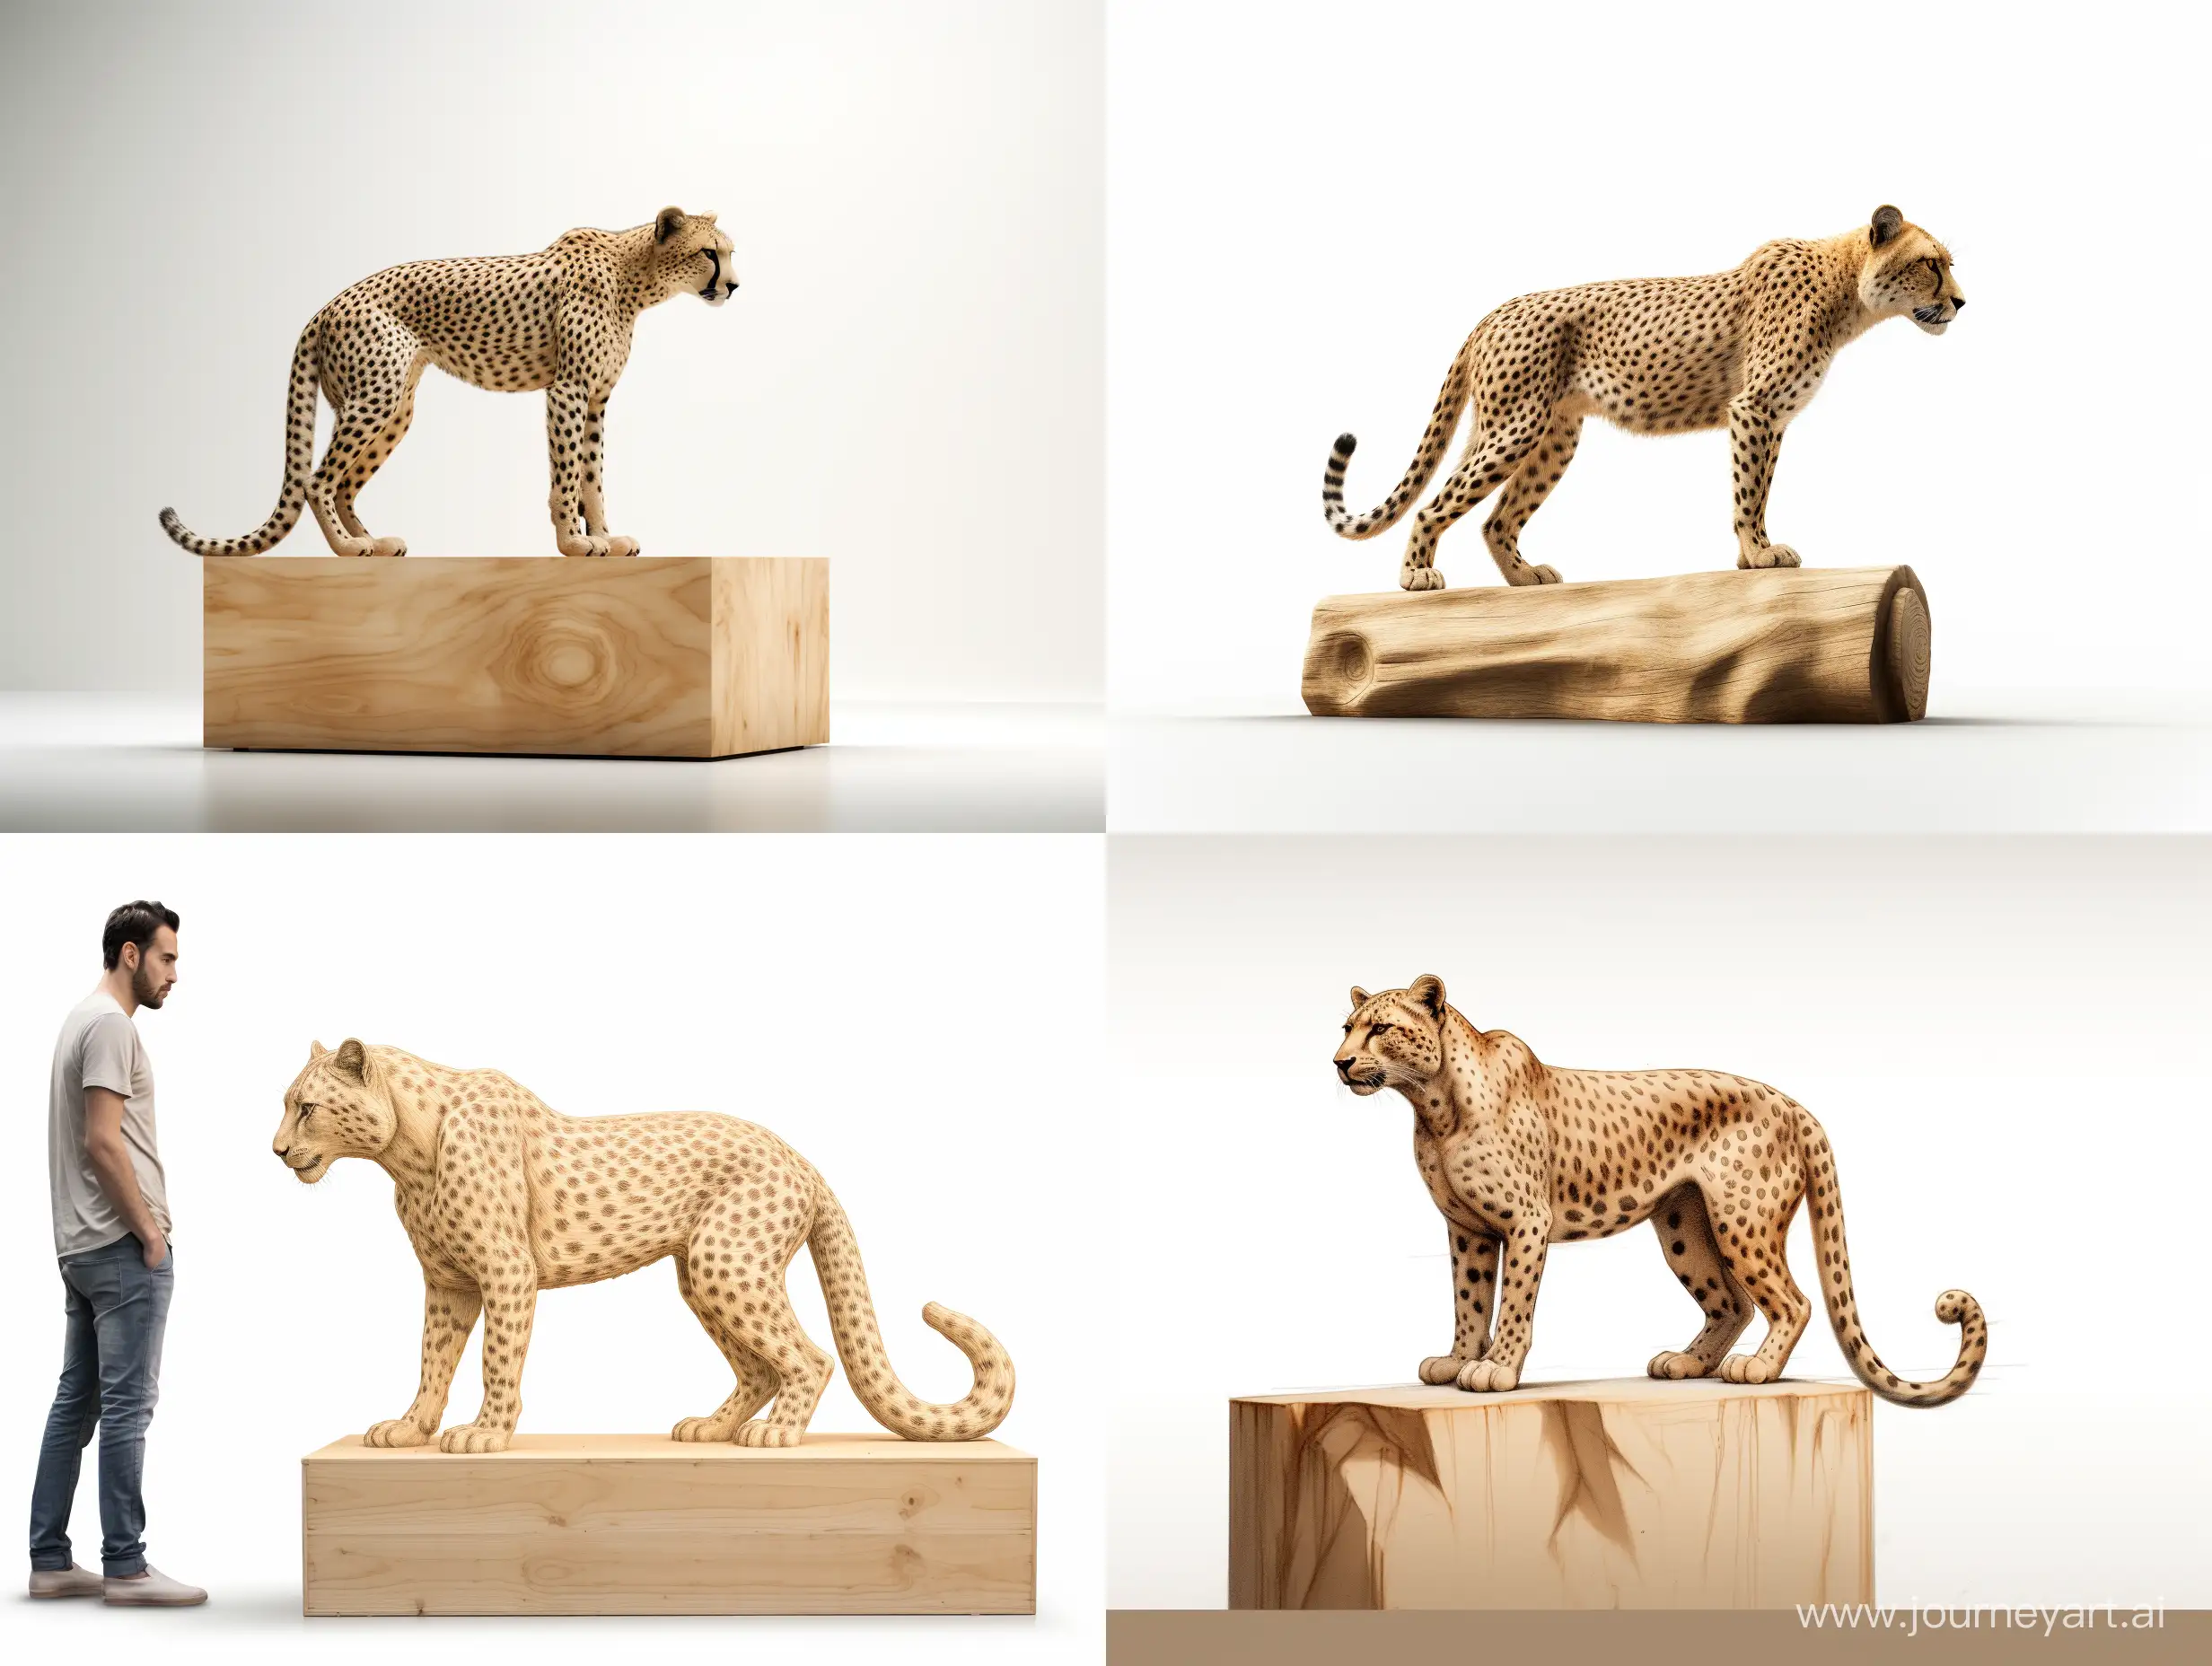 Majestic-3D-Wooden-Cheetah-Sculpture-in-Battle-Stance-on-a-Cube